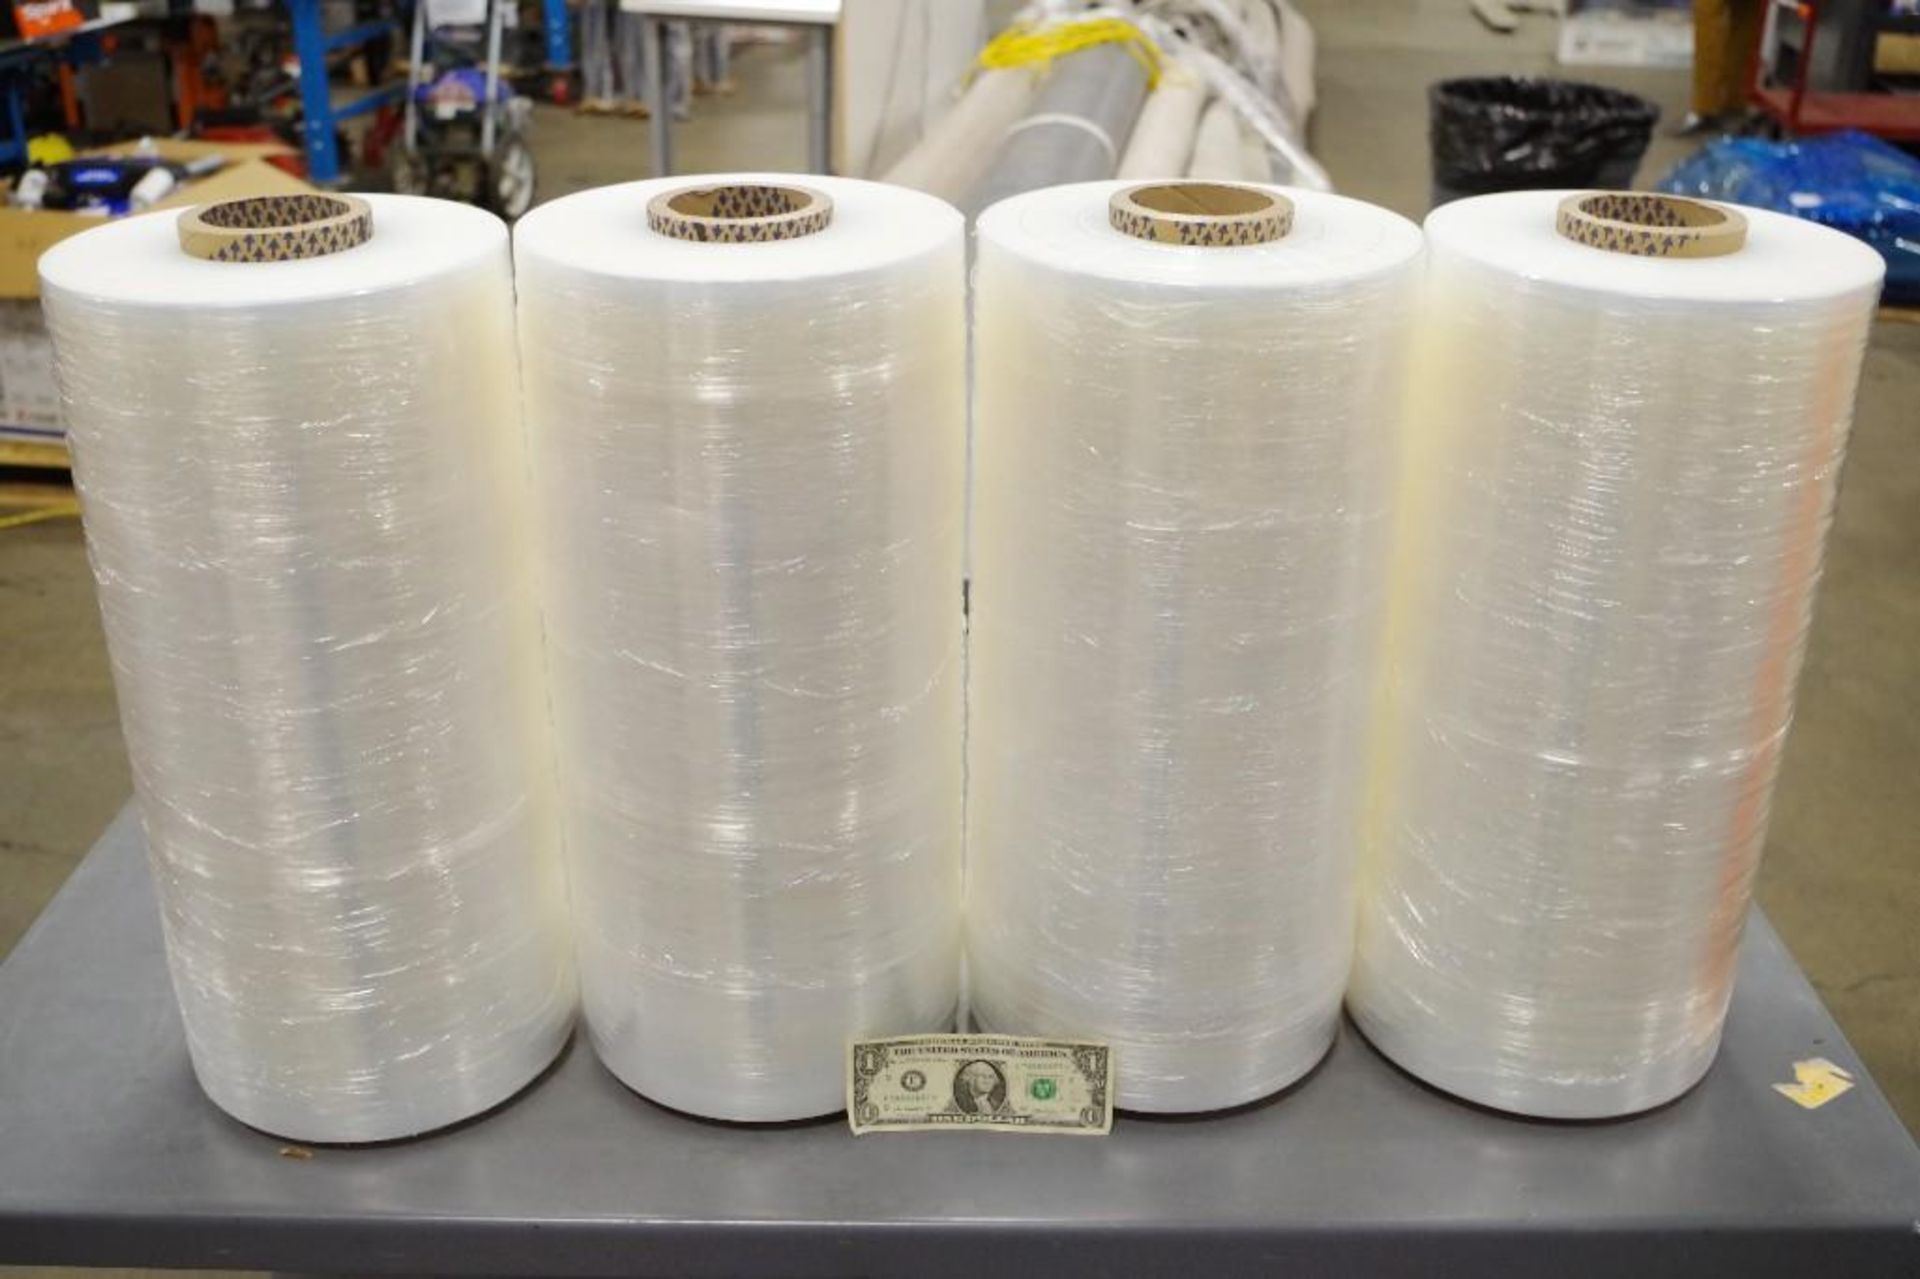 [4] NEW FORCE V Machine Film Large Rolls, Approx. Roll Size: 19.5"W x 9000'L - Image 2 of 4